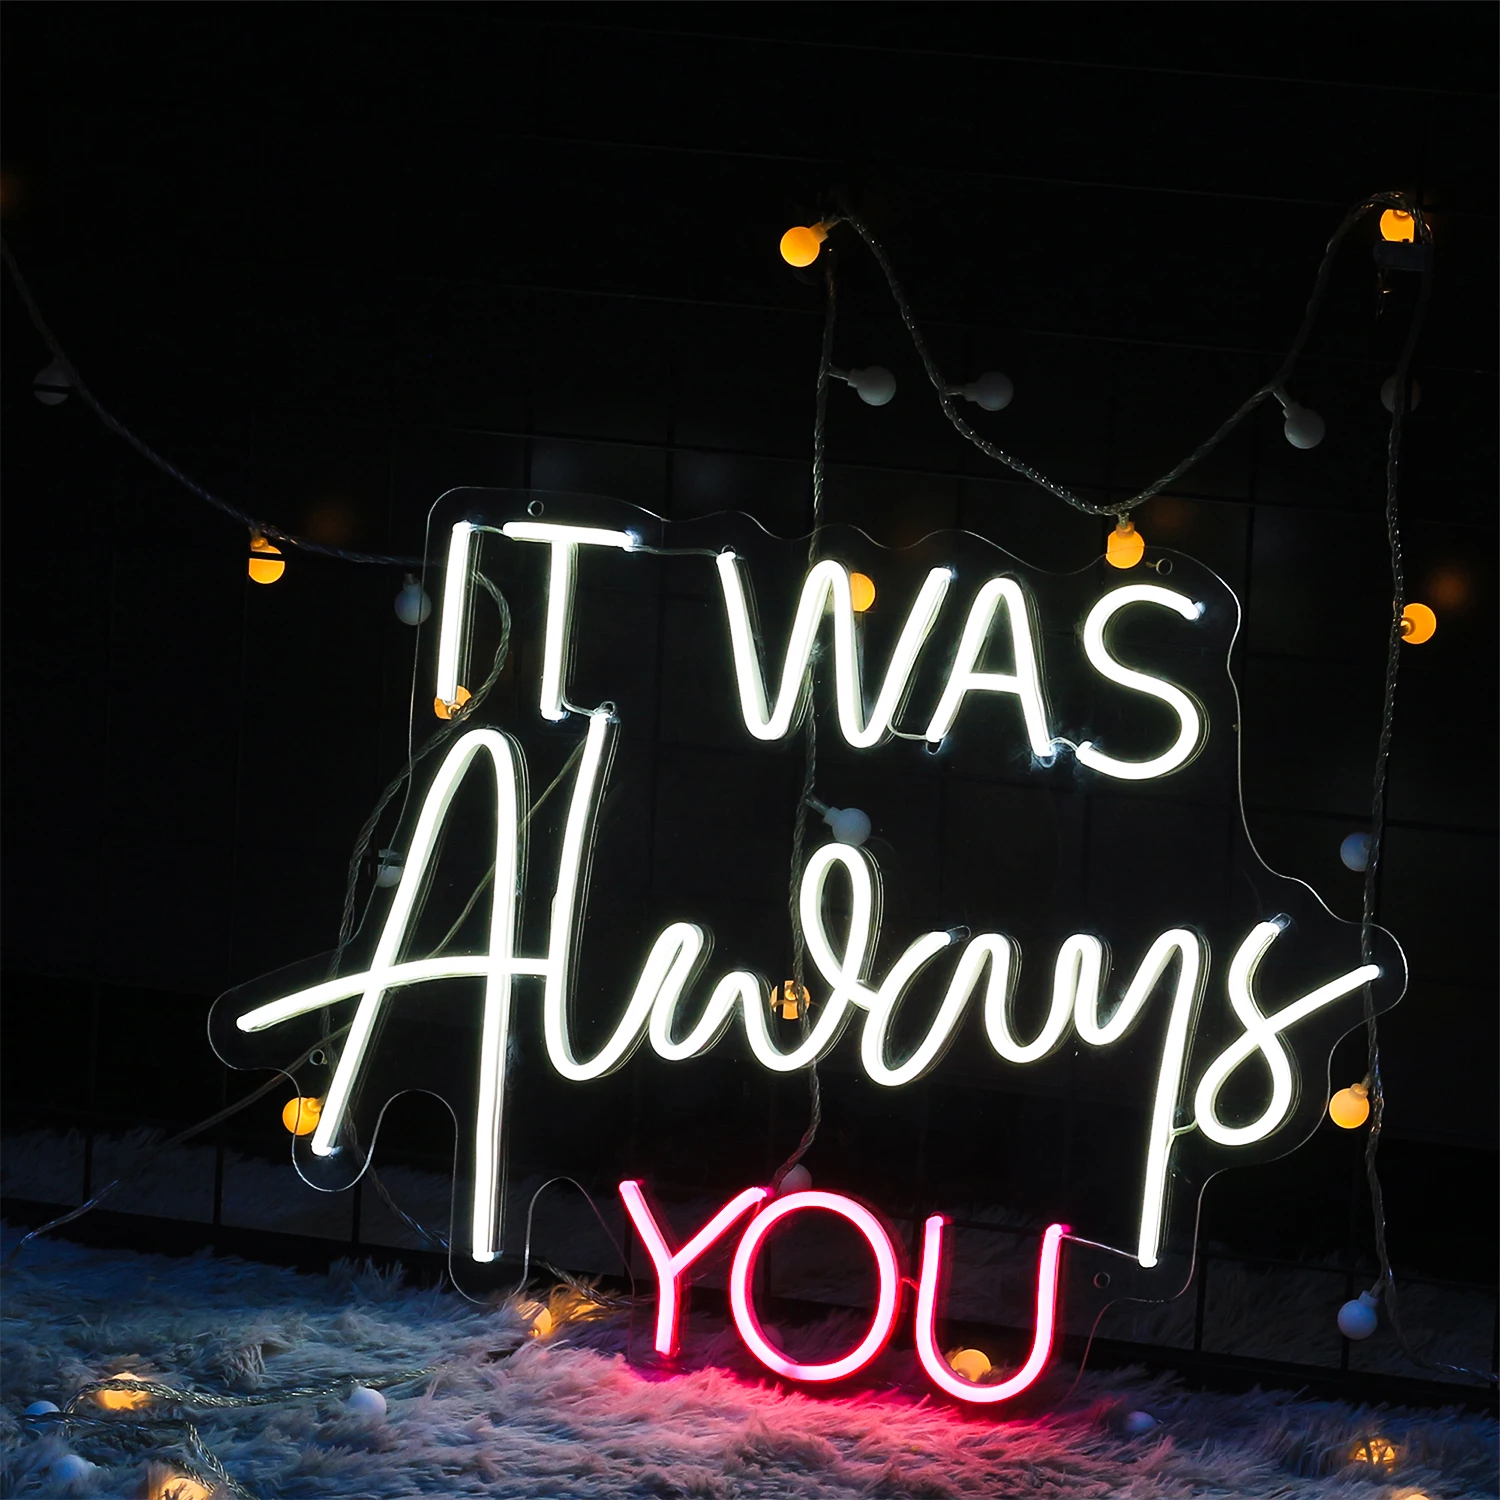 It Was Always You Neon Light Sign Handmade Wedding Wall Decoration Letter Led Bulbs For Party Home Decor Bridal Gift Banner Lamp